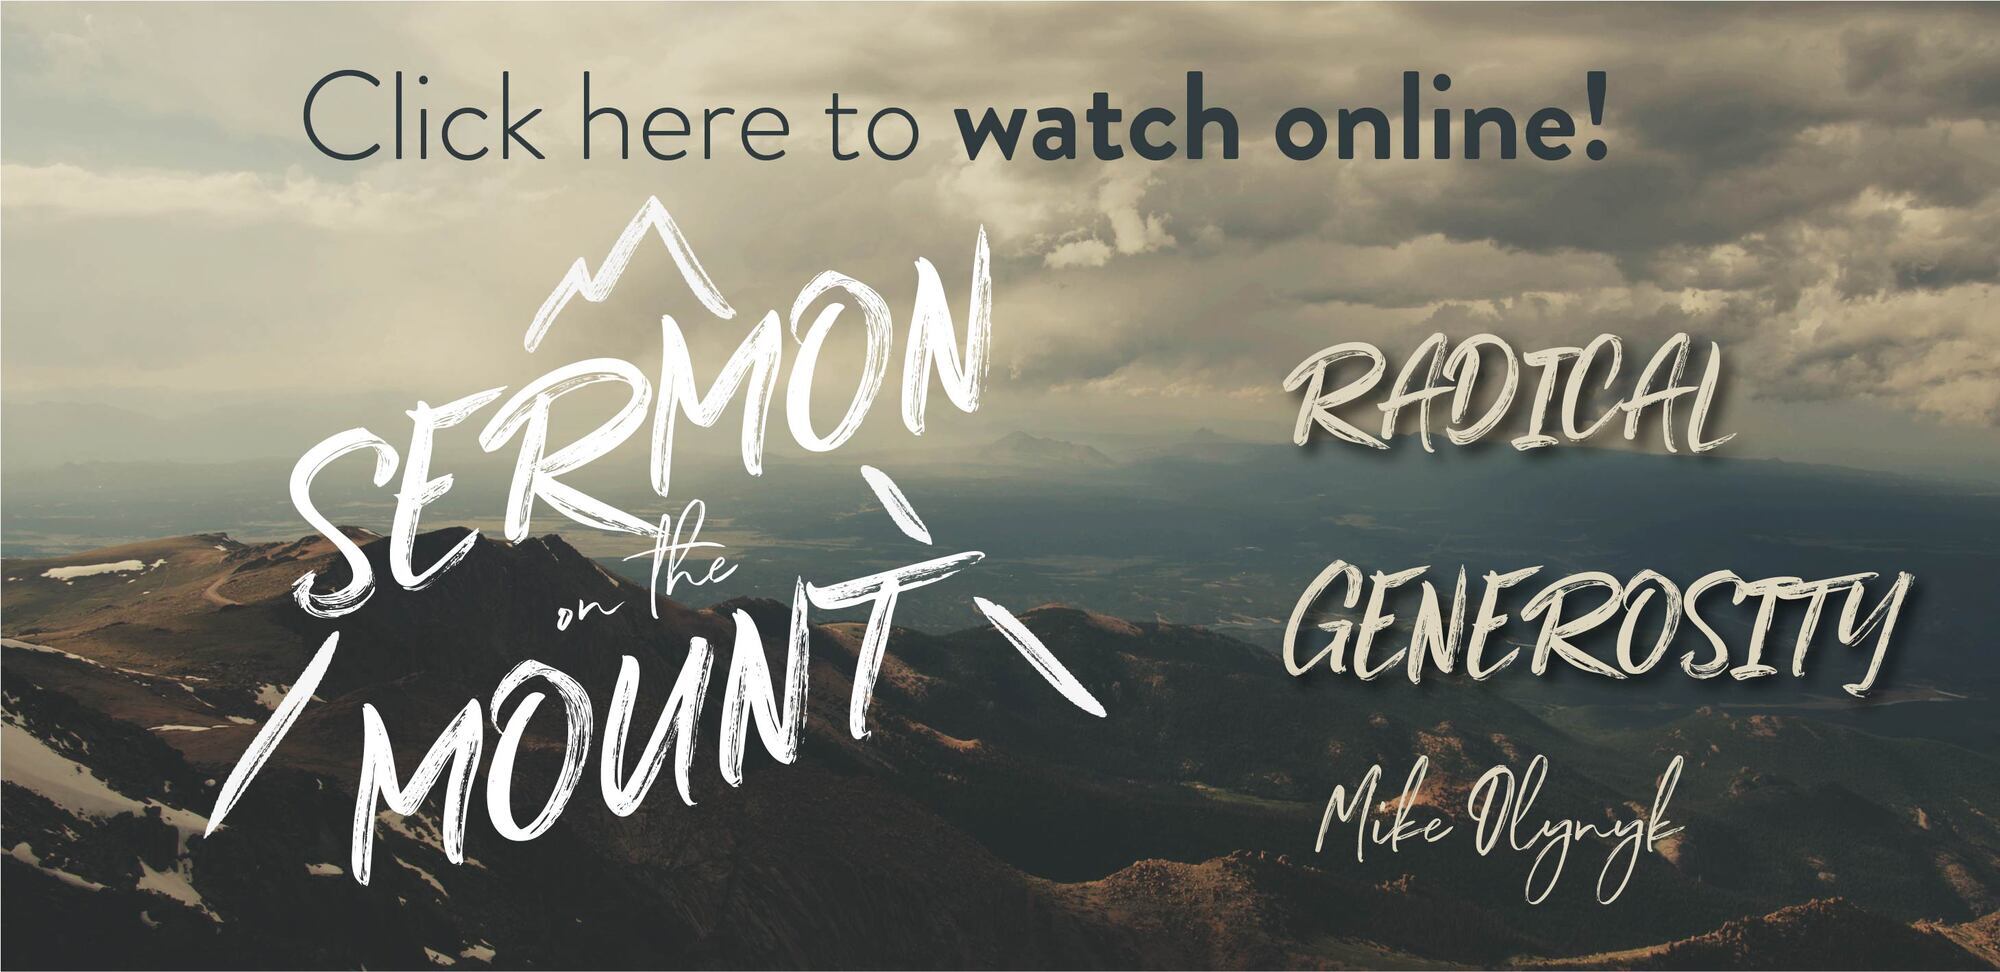 Preview of SERMON ON THE MOUNT: Radical Generosity